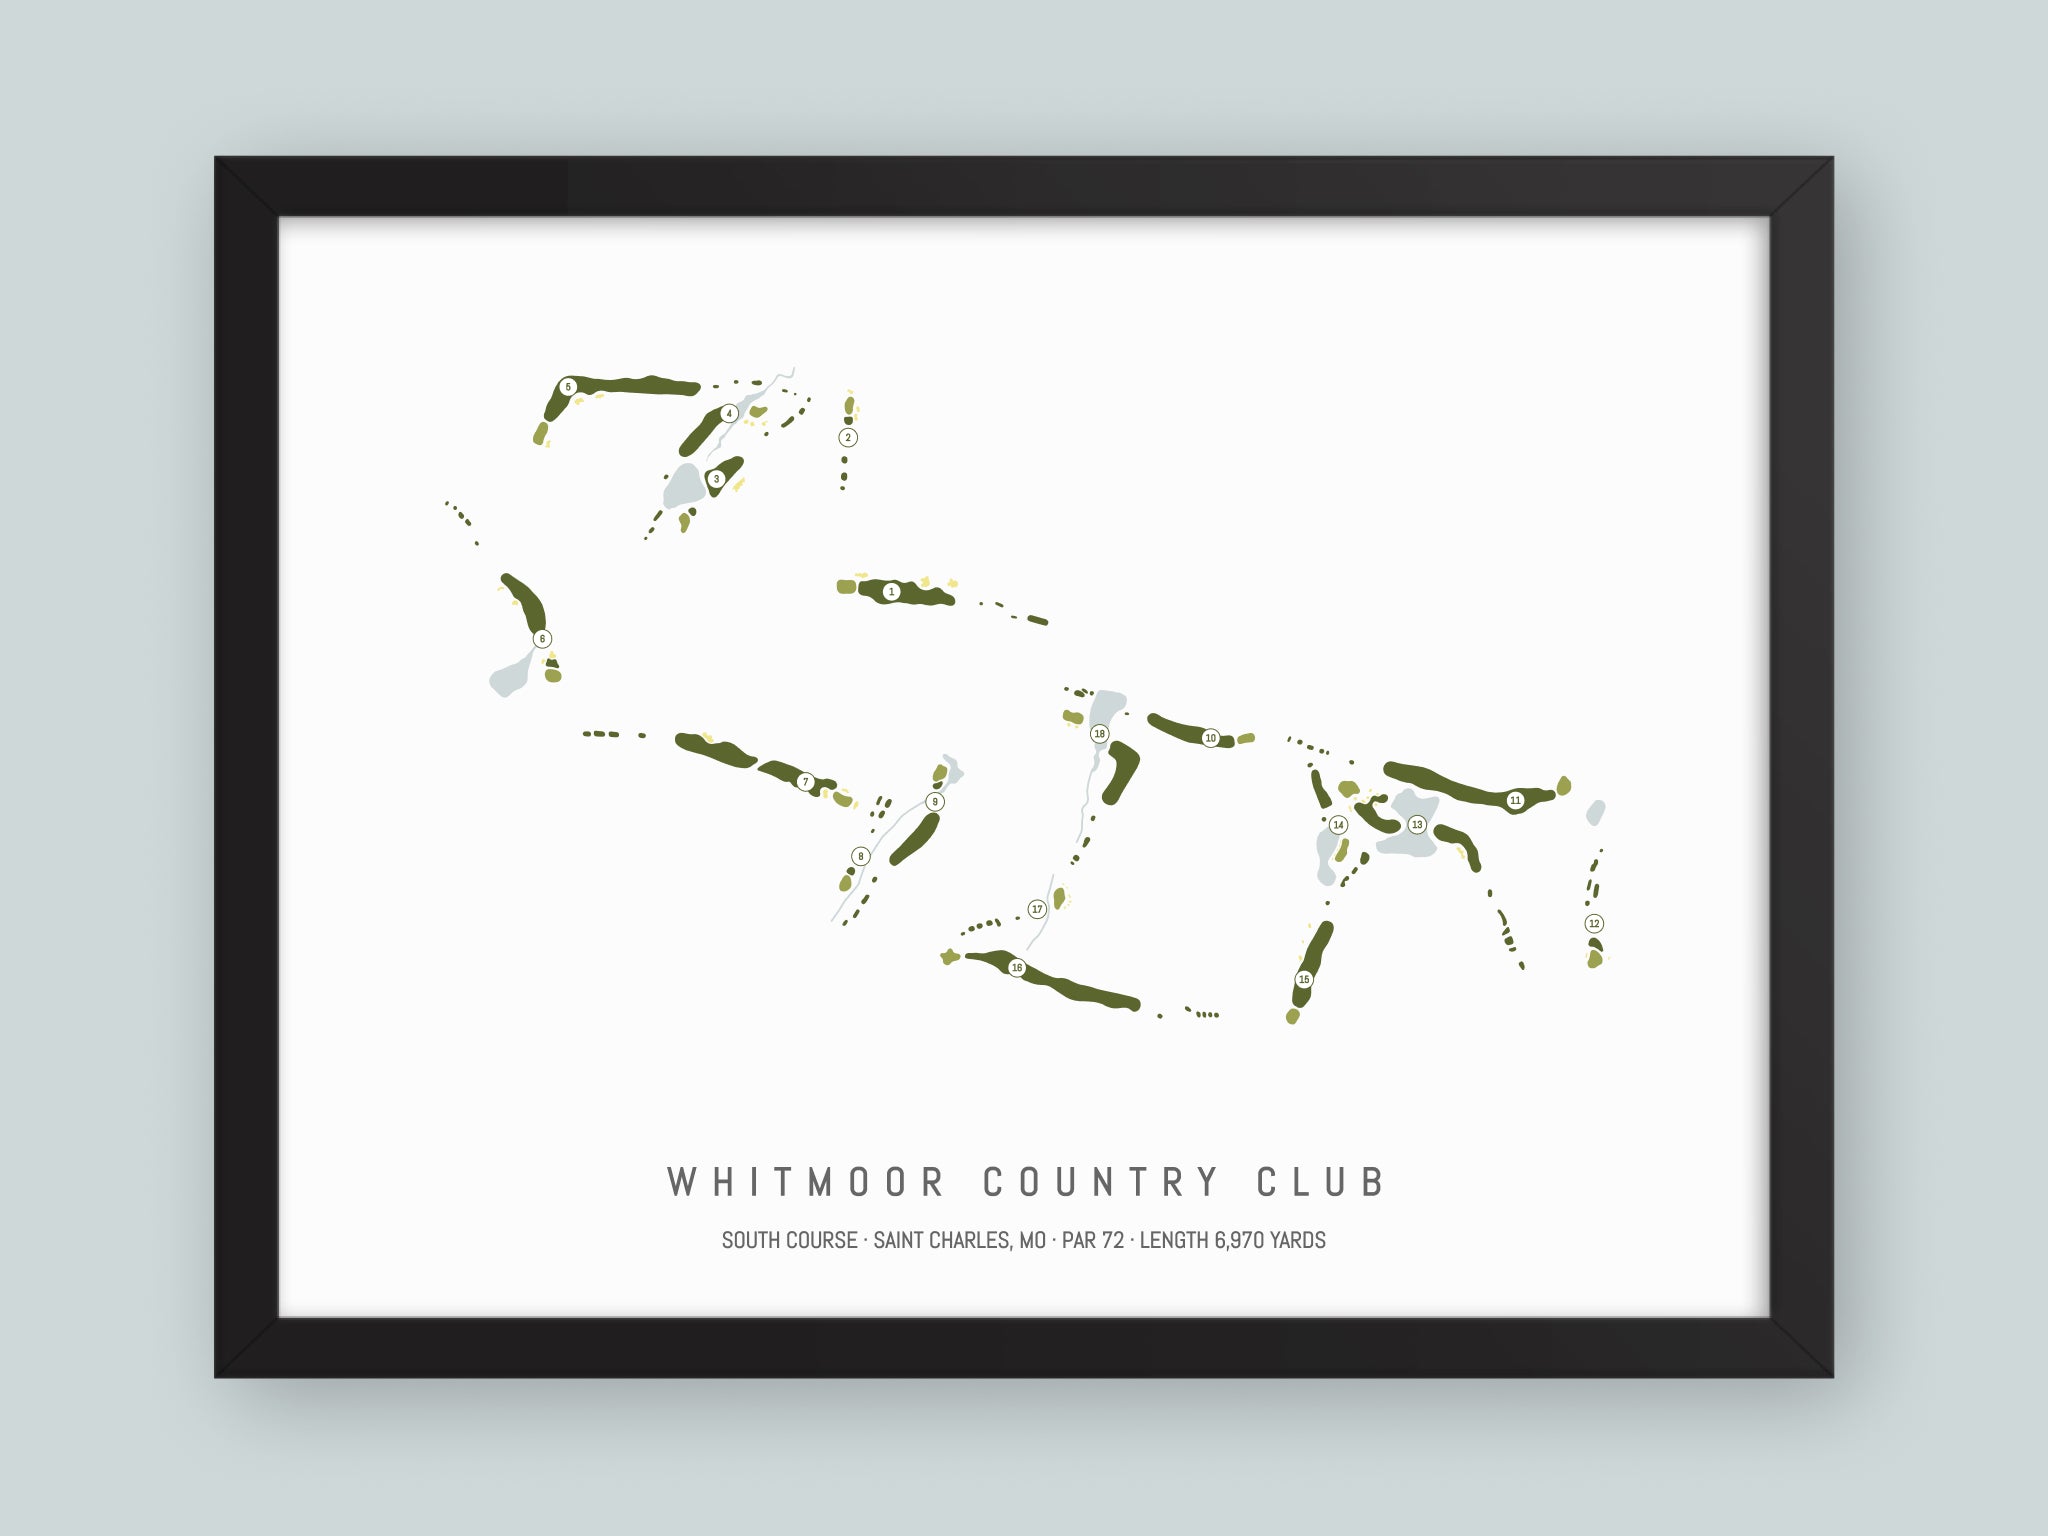 Whitmoor Country Club - South Course